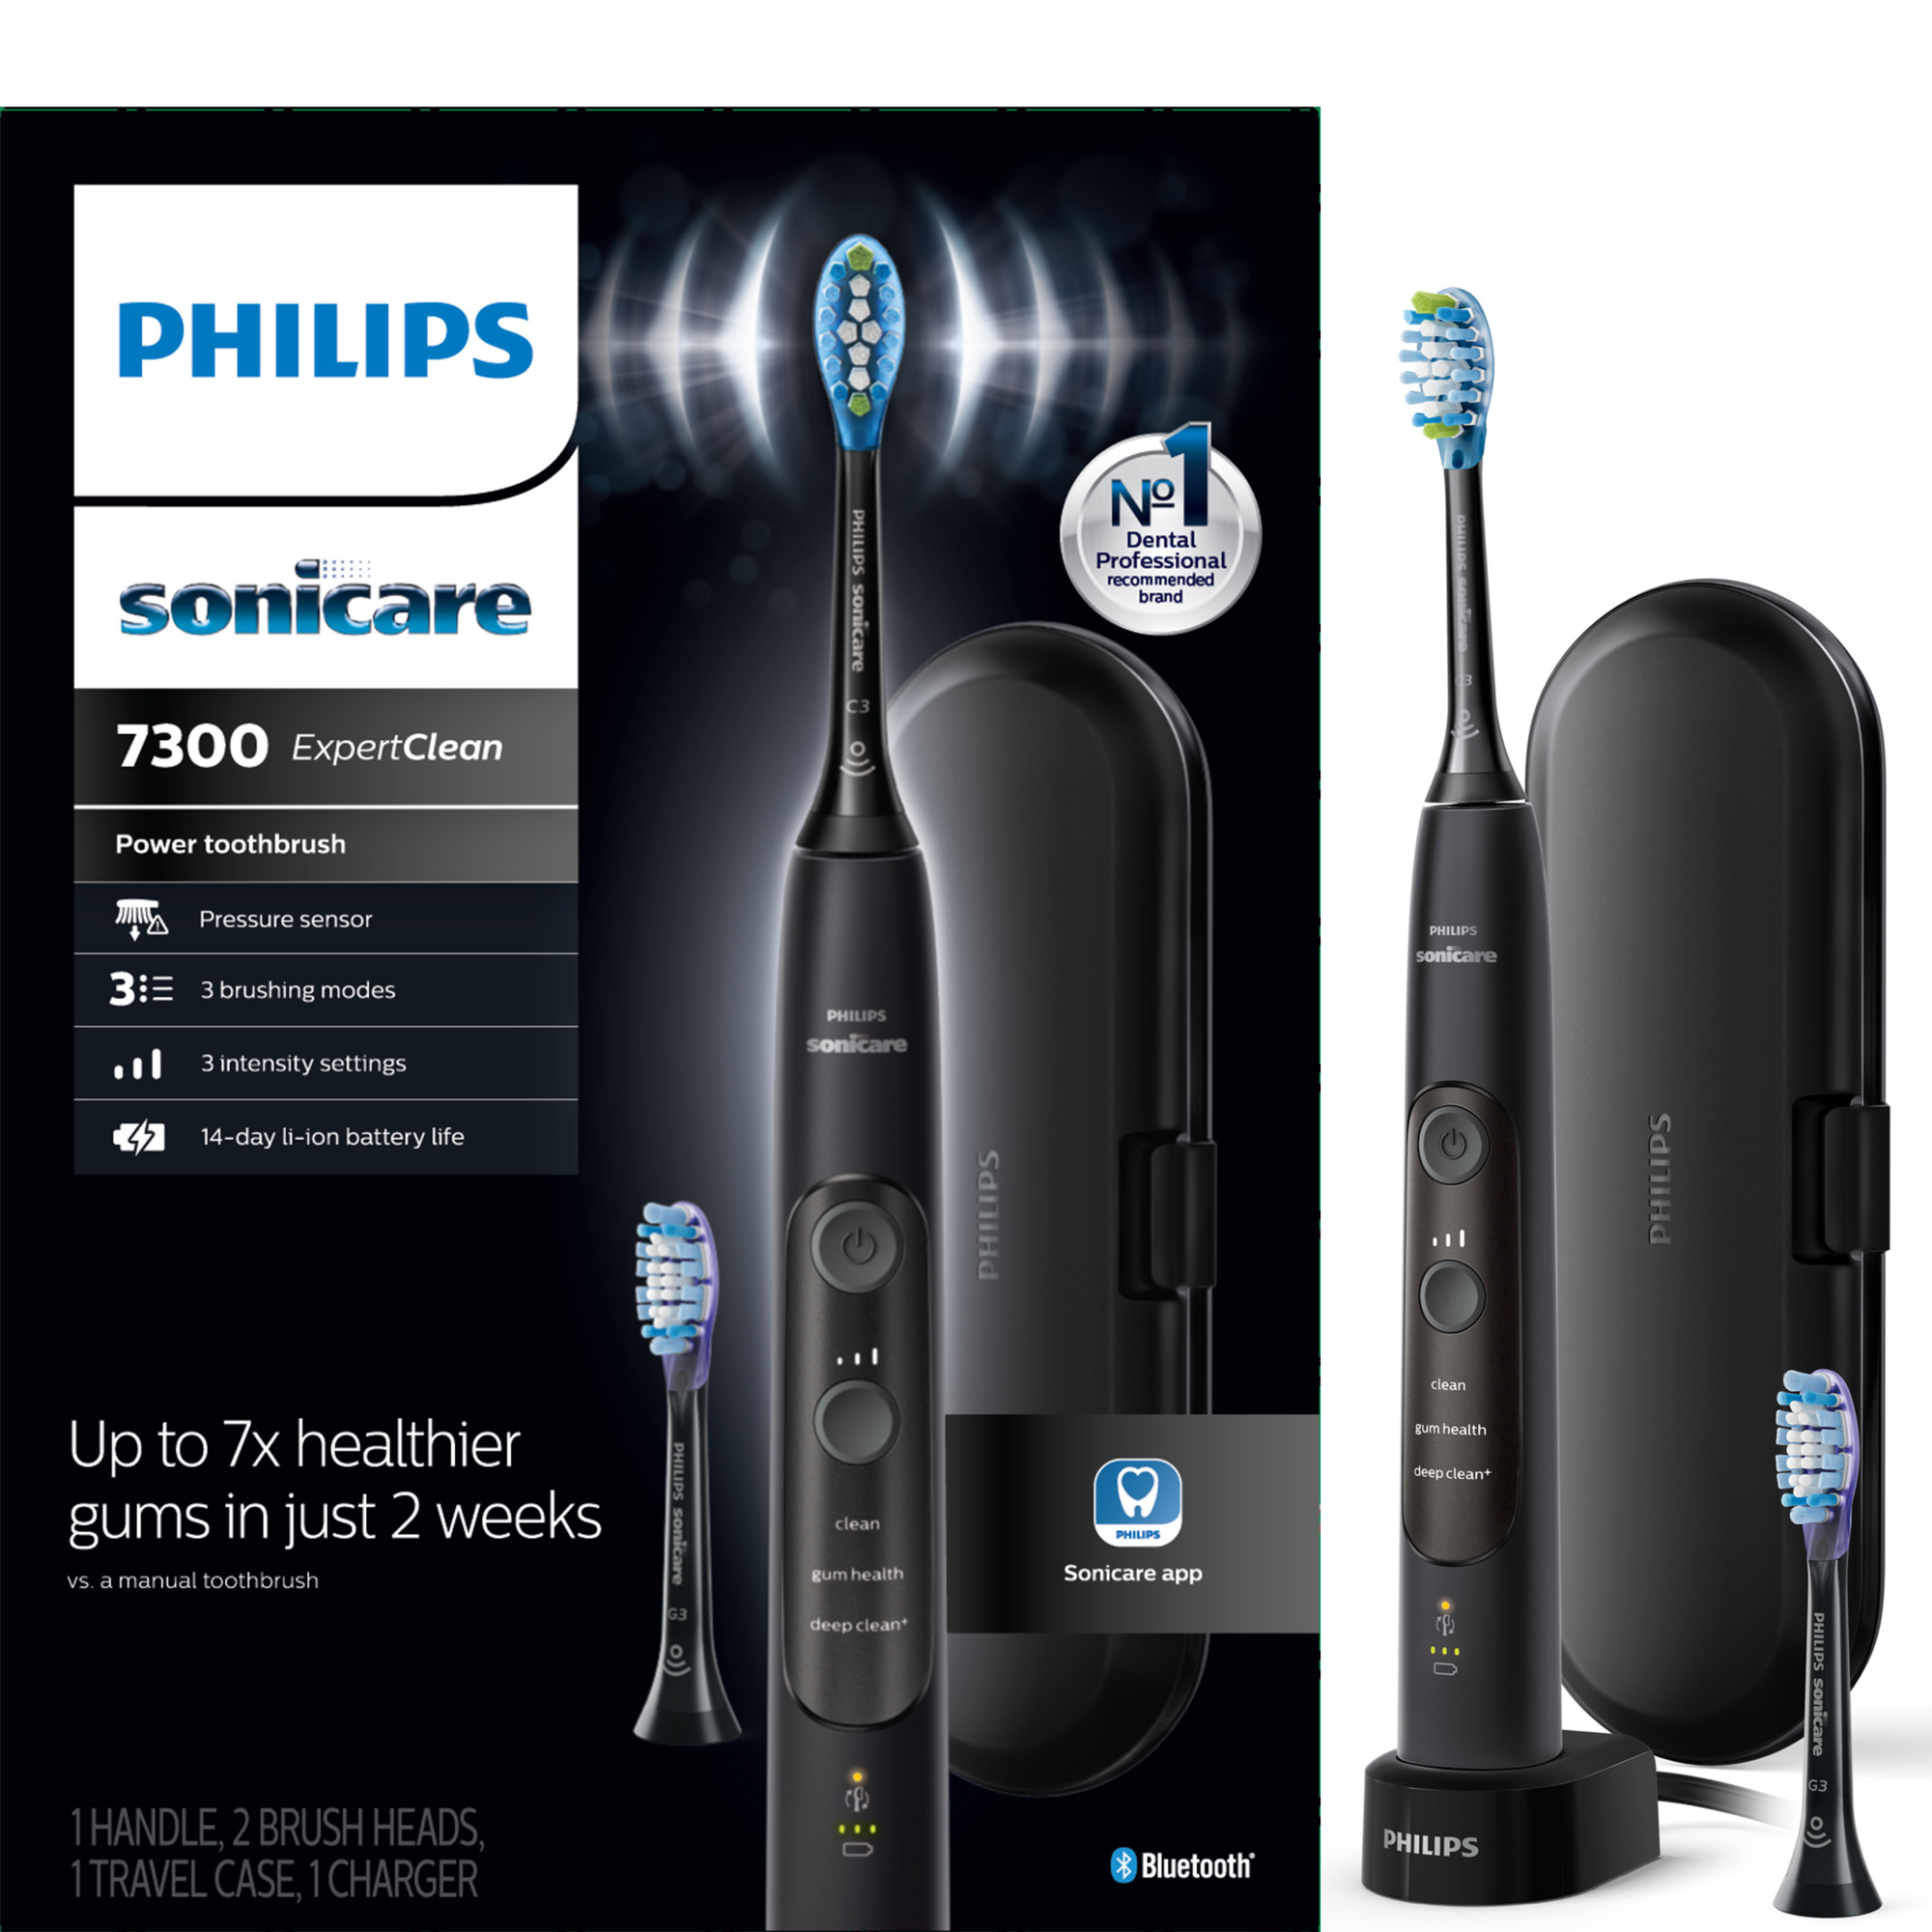 Philips Sonicare ExpertClean 7300, Rechargeable Electric Toothbrush, Black HX9610/17 - image 1 of 19